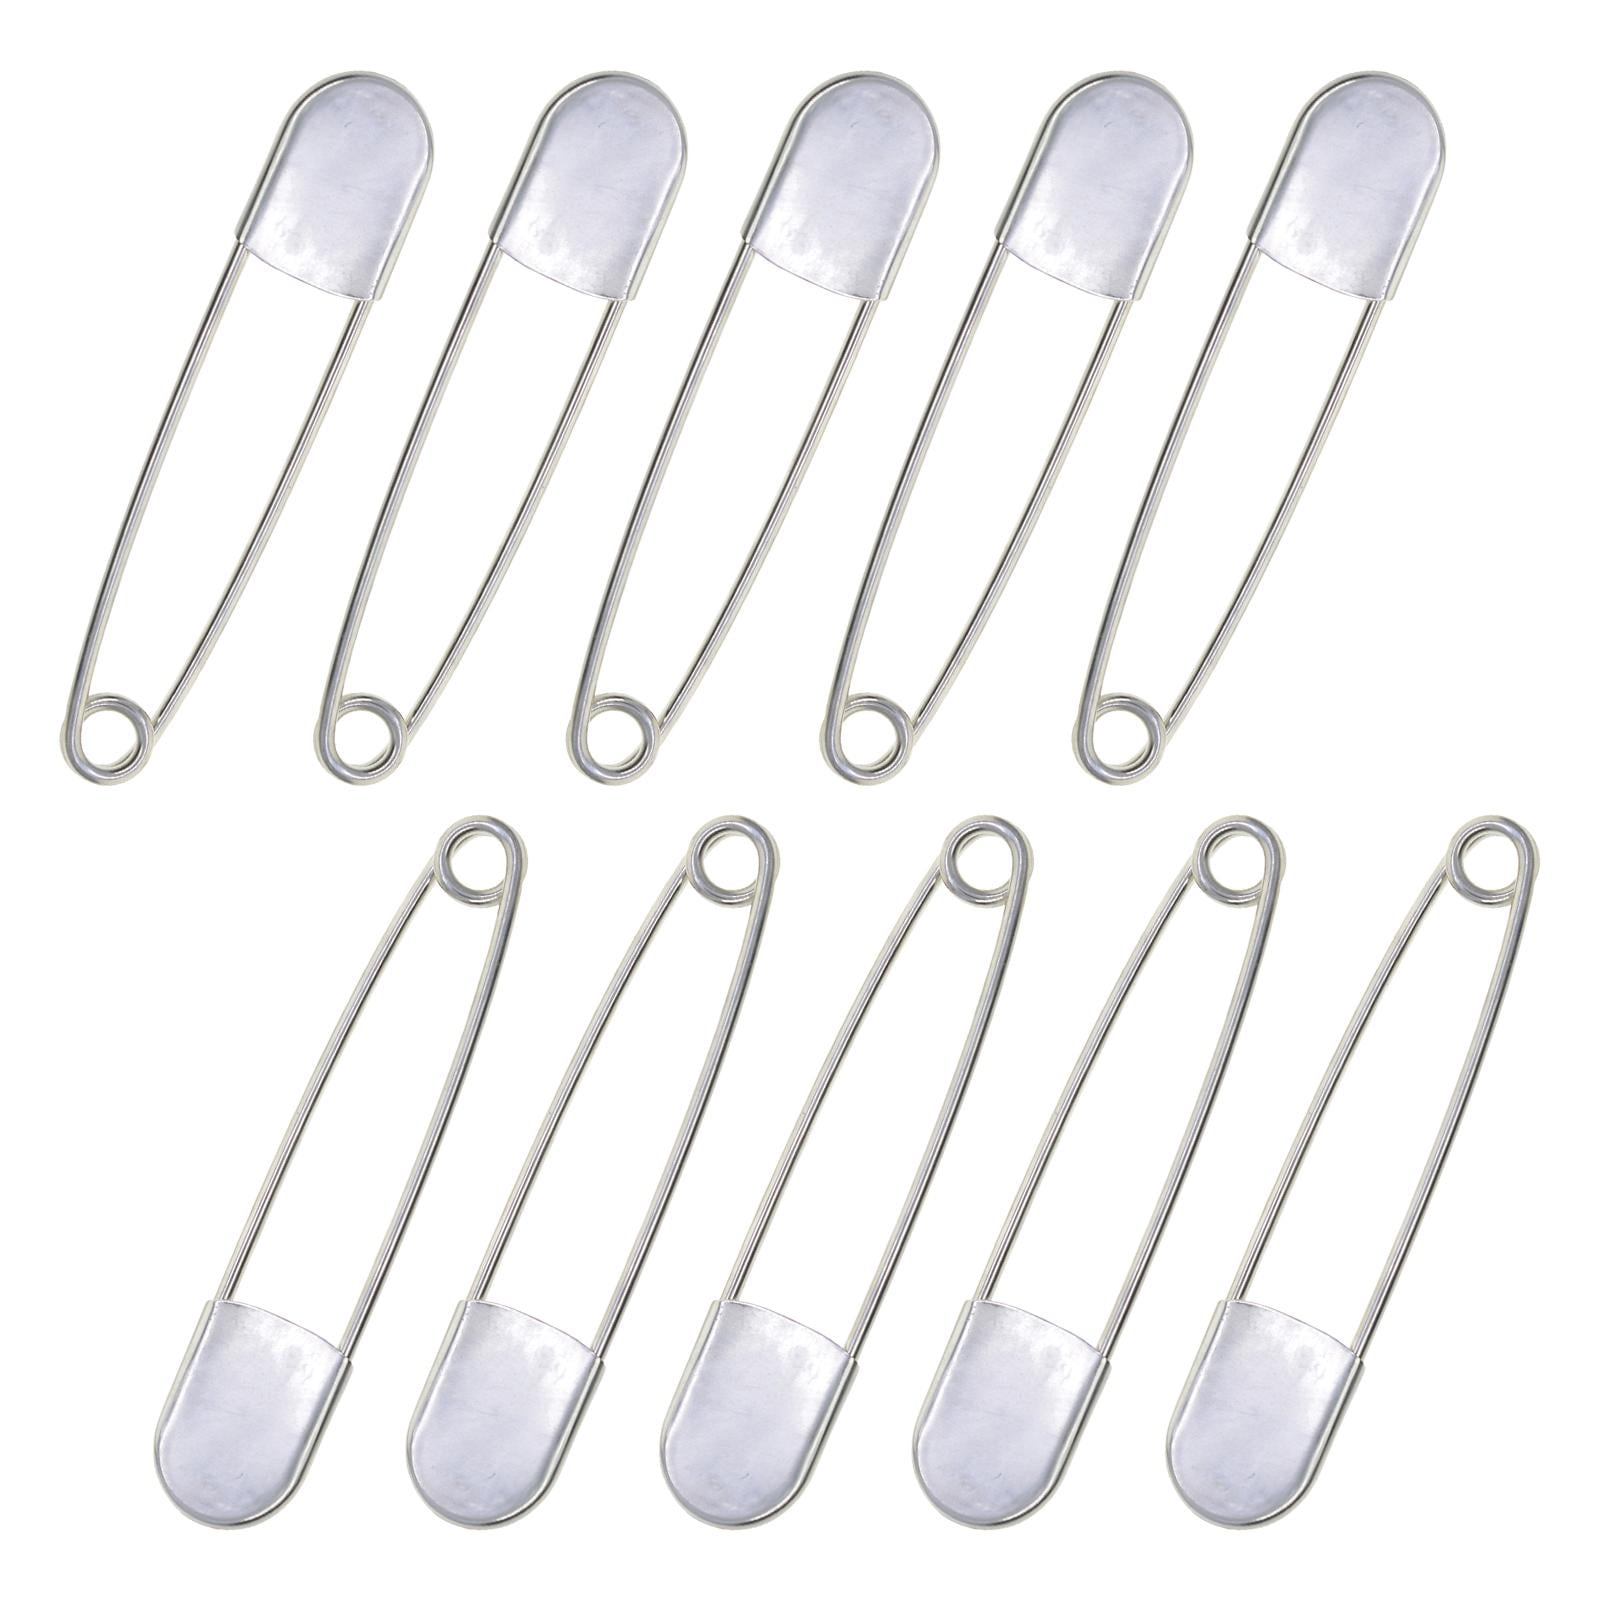 10 Pieces 5 inch Extra Large Safety Pins Heavy Duty Stainless Steel for  Craft, Outdoor, Key Rings, Upholstery, Fashion 